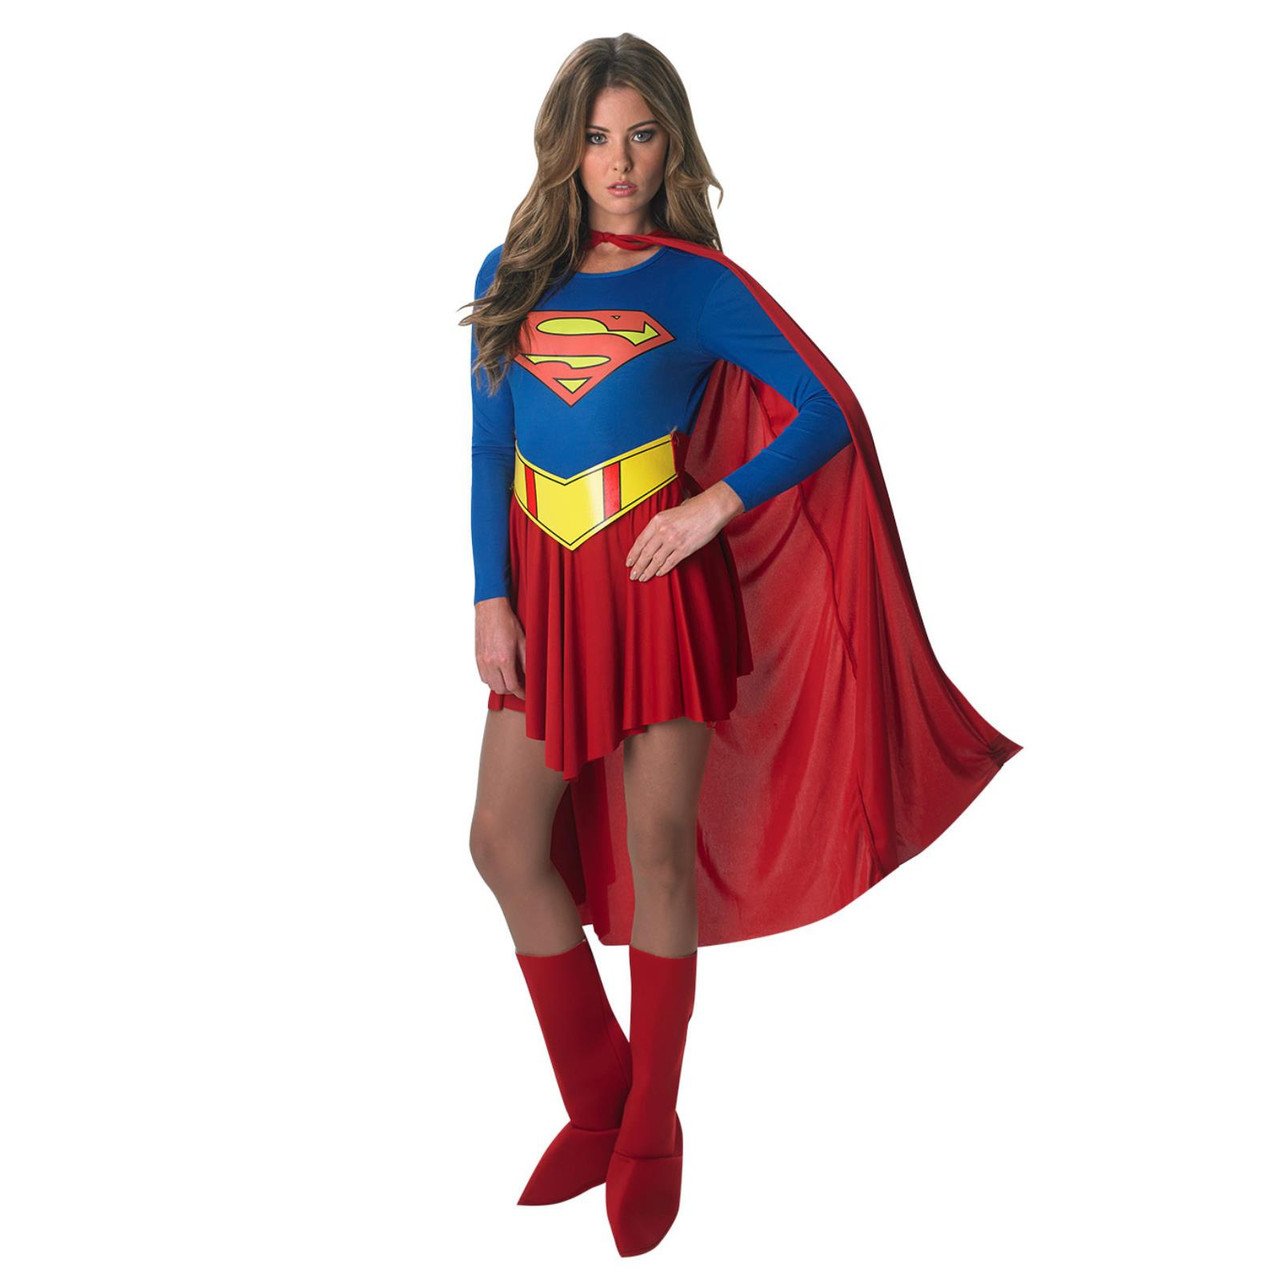 Ladies Official DC Supergirl Costume with Cape - Fancy Dress VIP